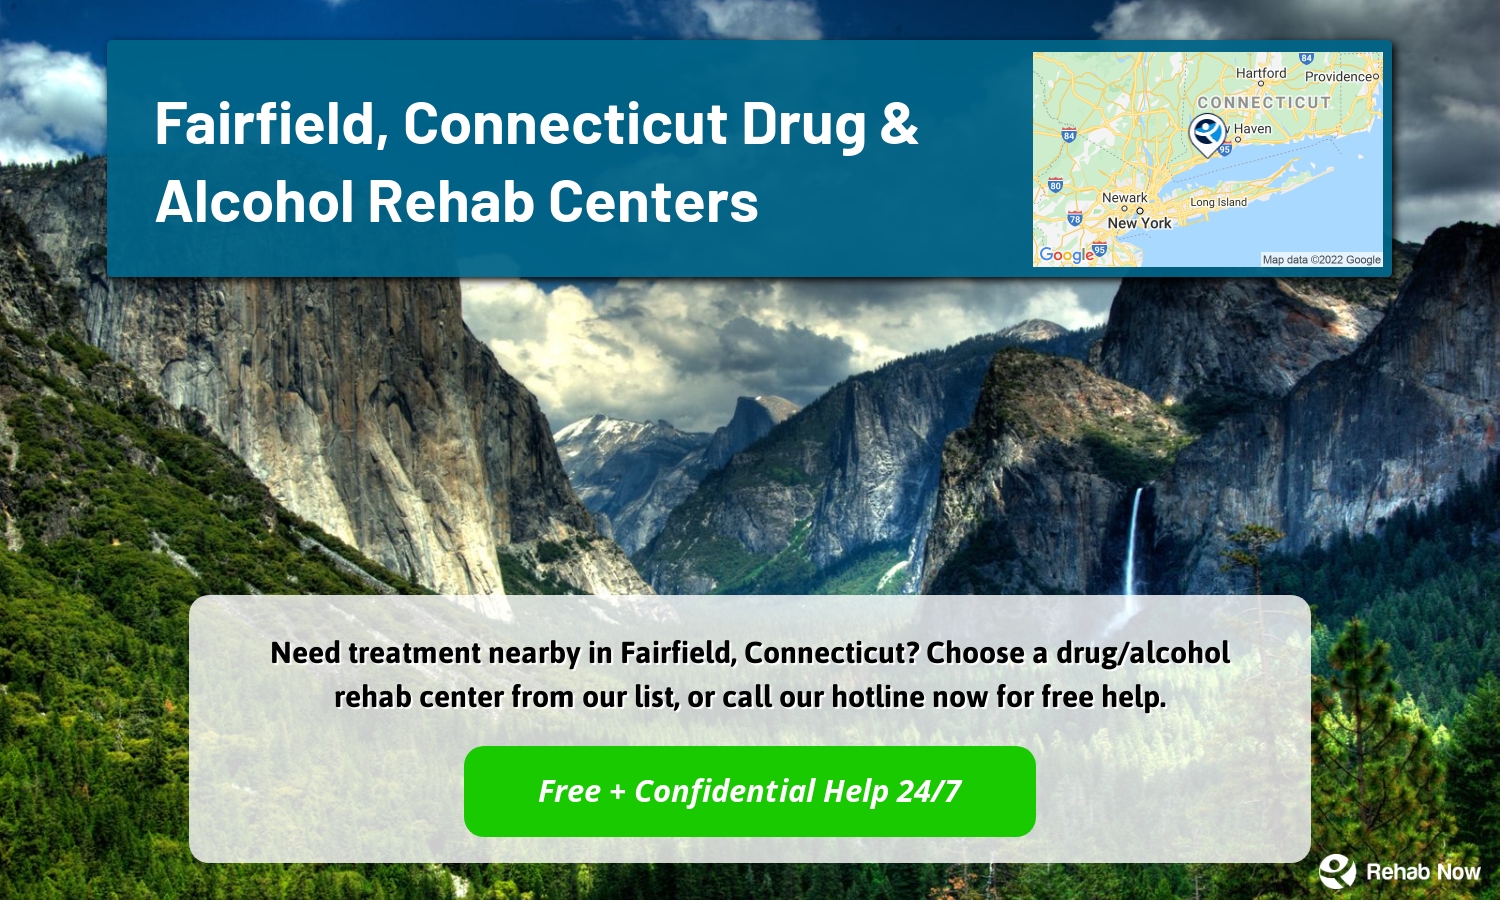 Need treatment nearby in Fairfield, Connecticut? Choose a drug/alcohol rehab center from our list, or call our hotline now for free help.